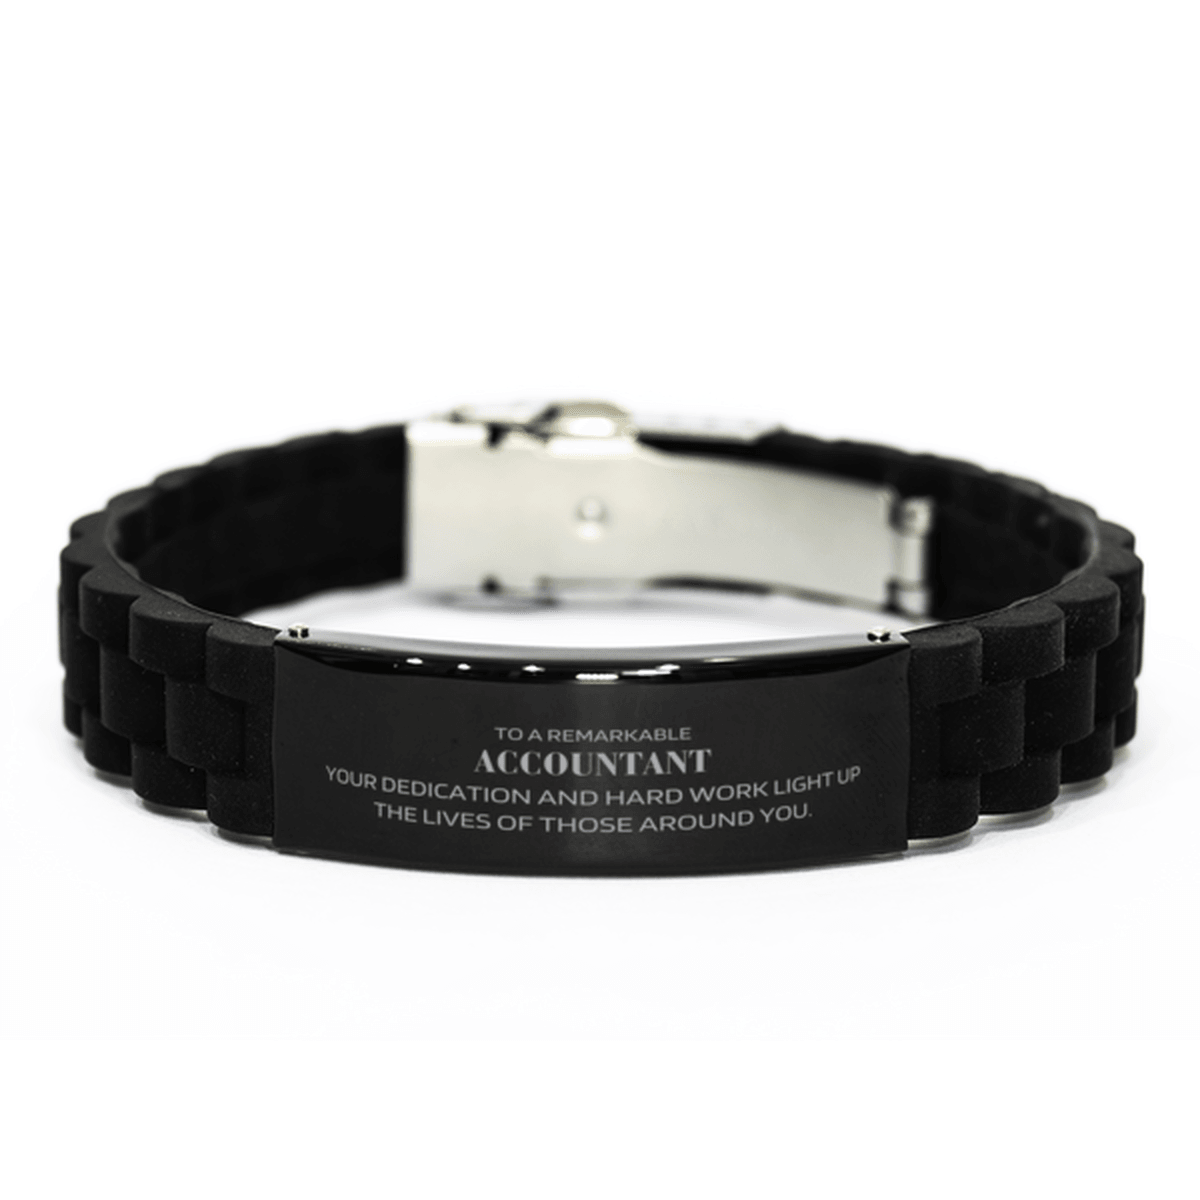 Remarkable Accountant Gifts, Your dedication and hard work, Inspirational Birthday Christmas Unique Black Glidelock Clasp Bracelet For Accountant, Coworkers, Men, Women, Friends - Mallard Moon Gift Shop